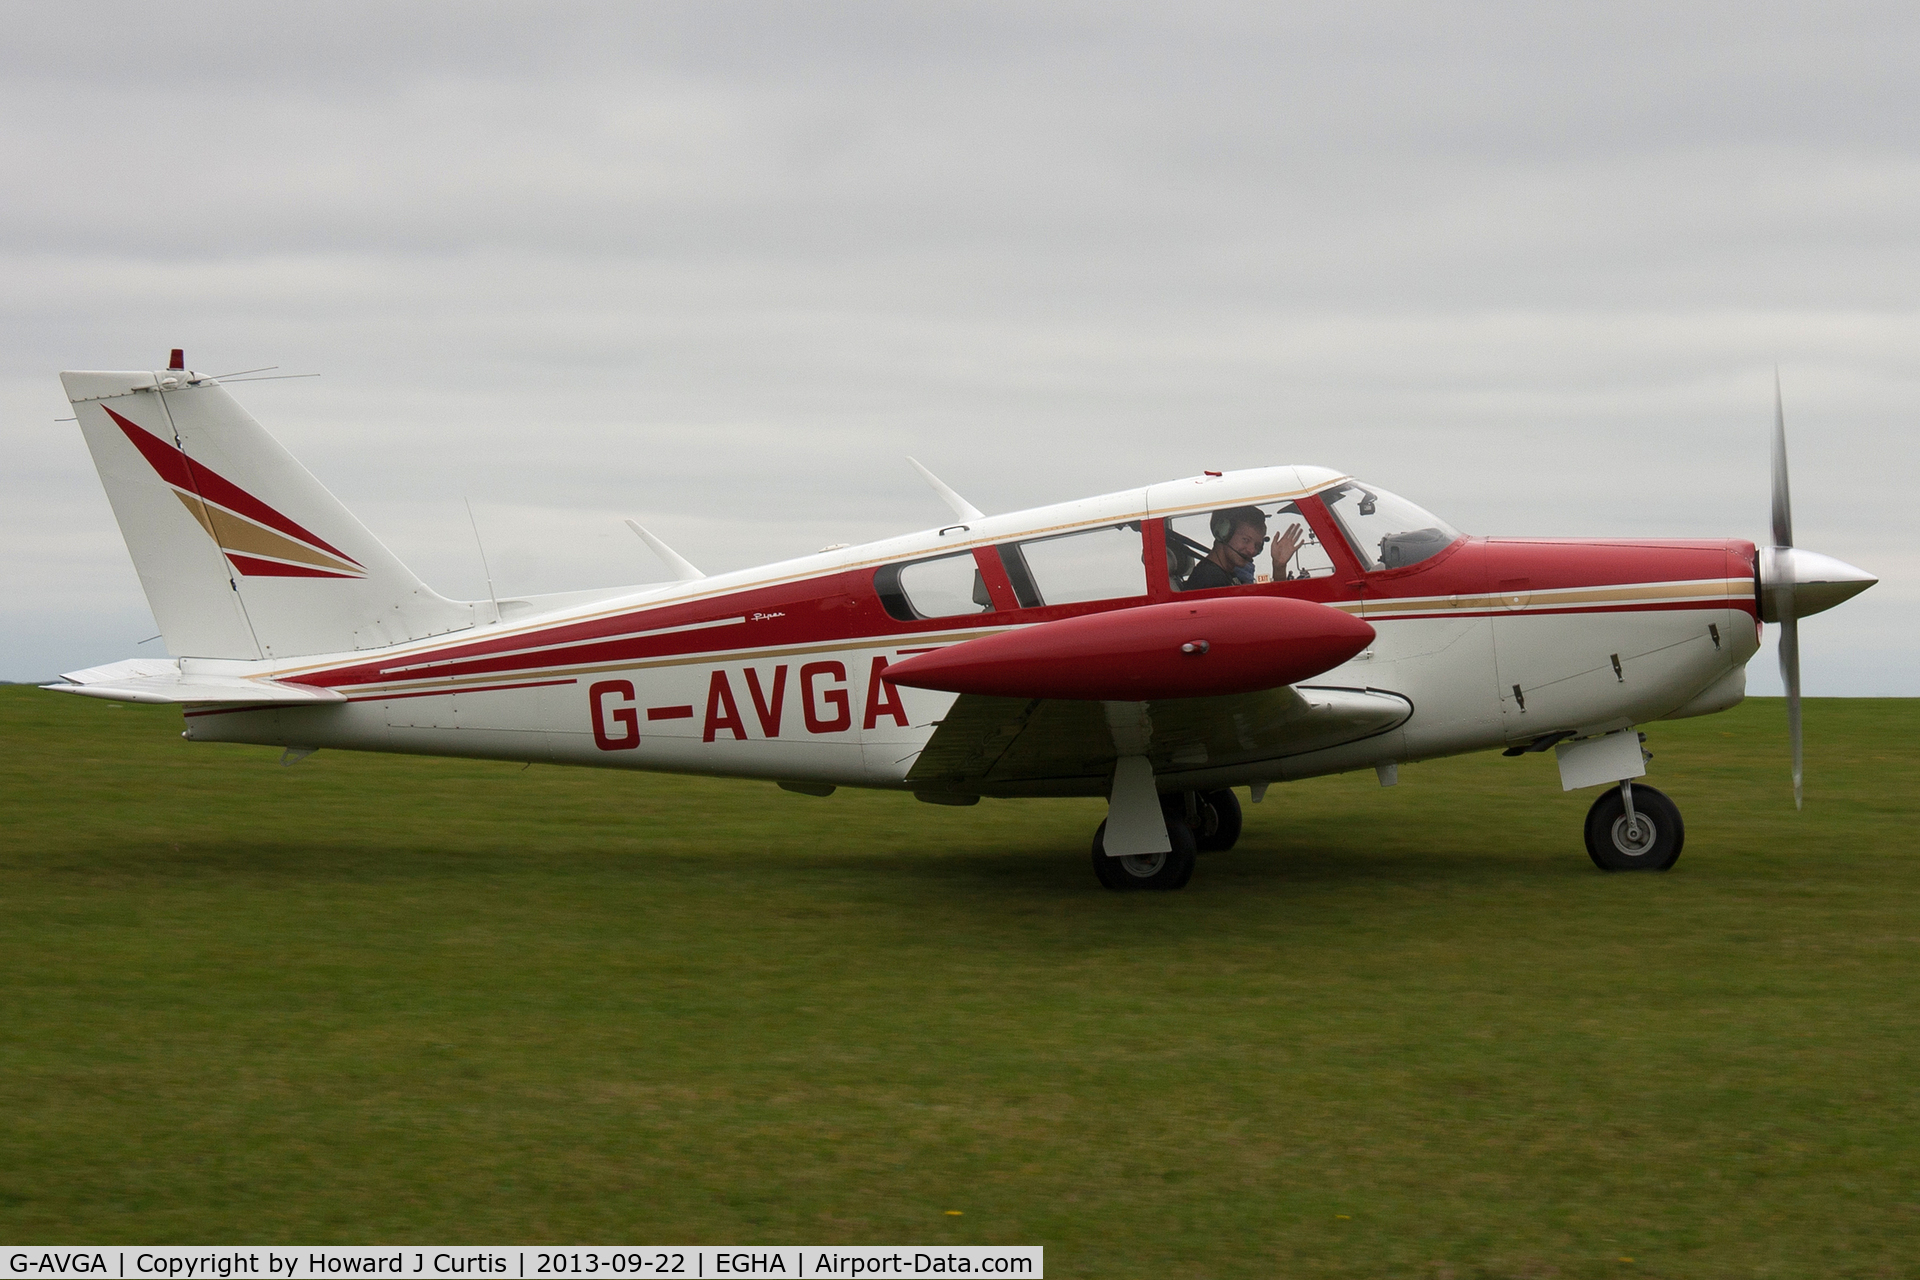 G-AVGA, 1966 Piper PA-24-260 Comanche B C/N 24-4489, Privately owned.